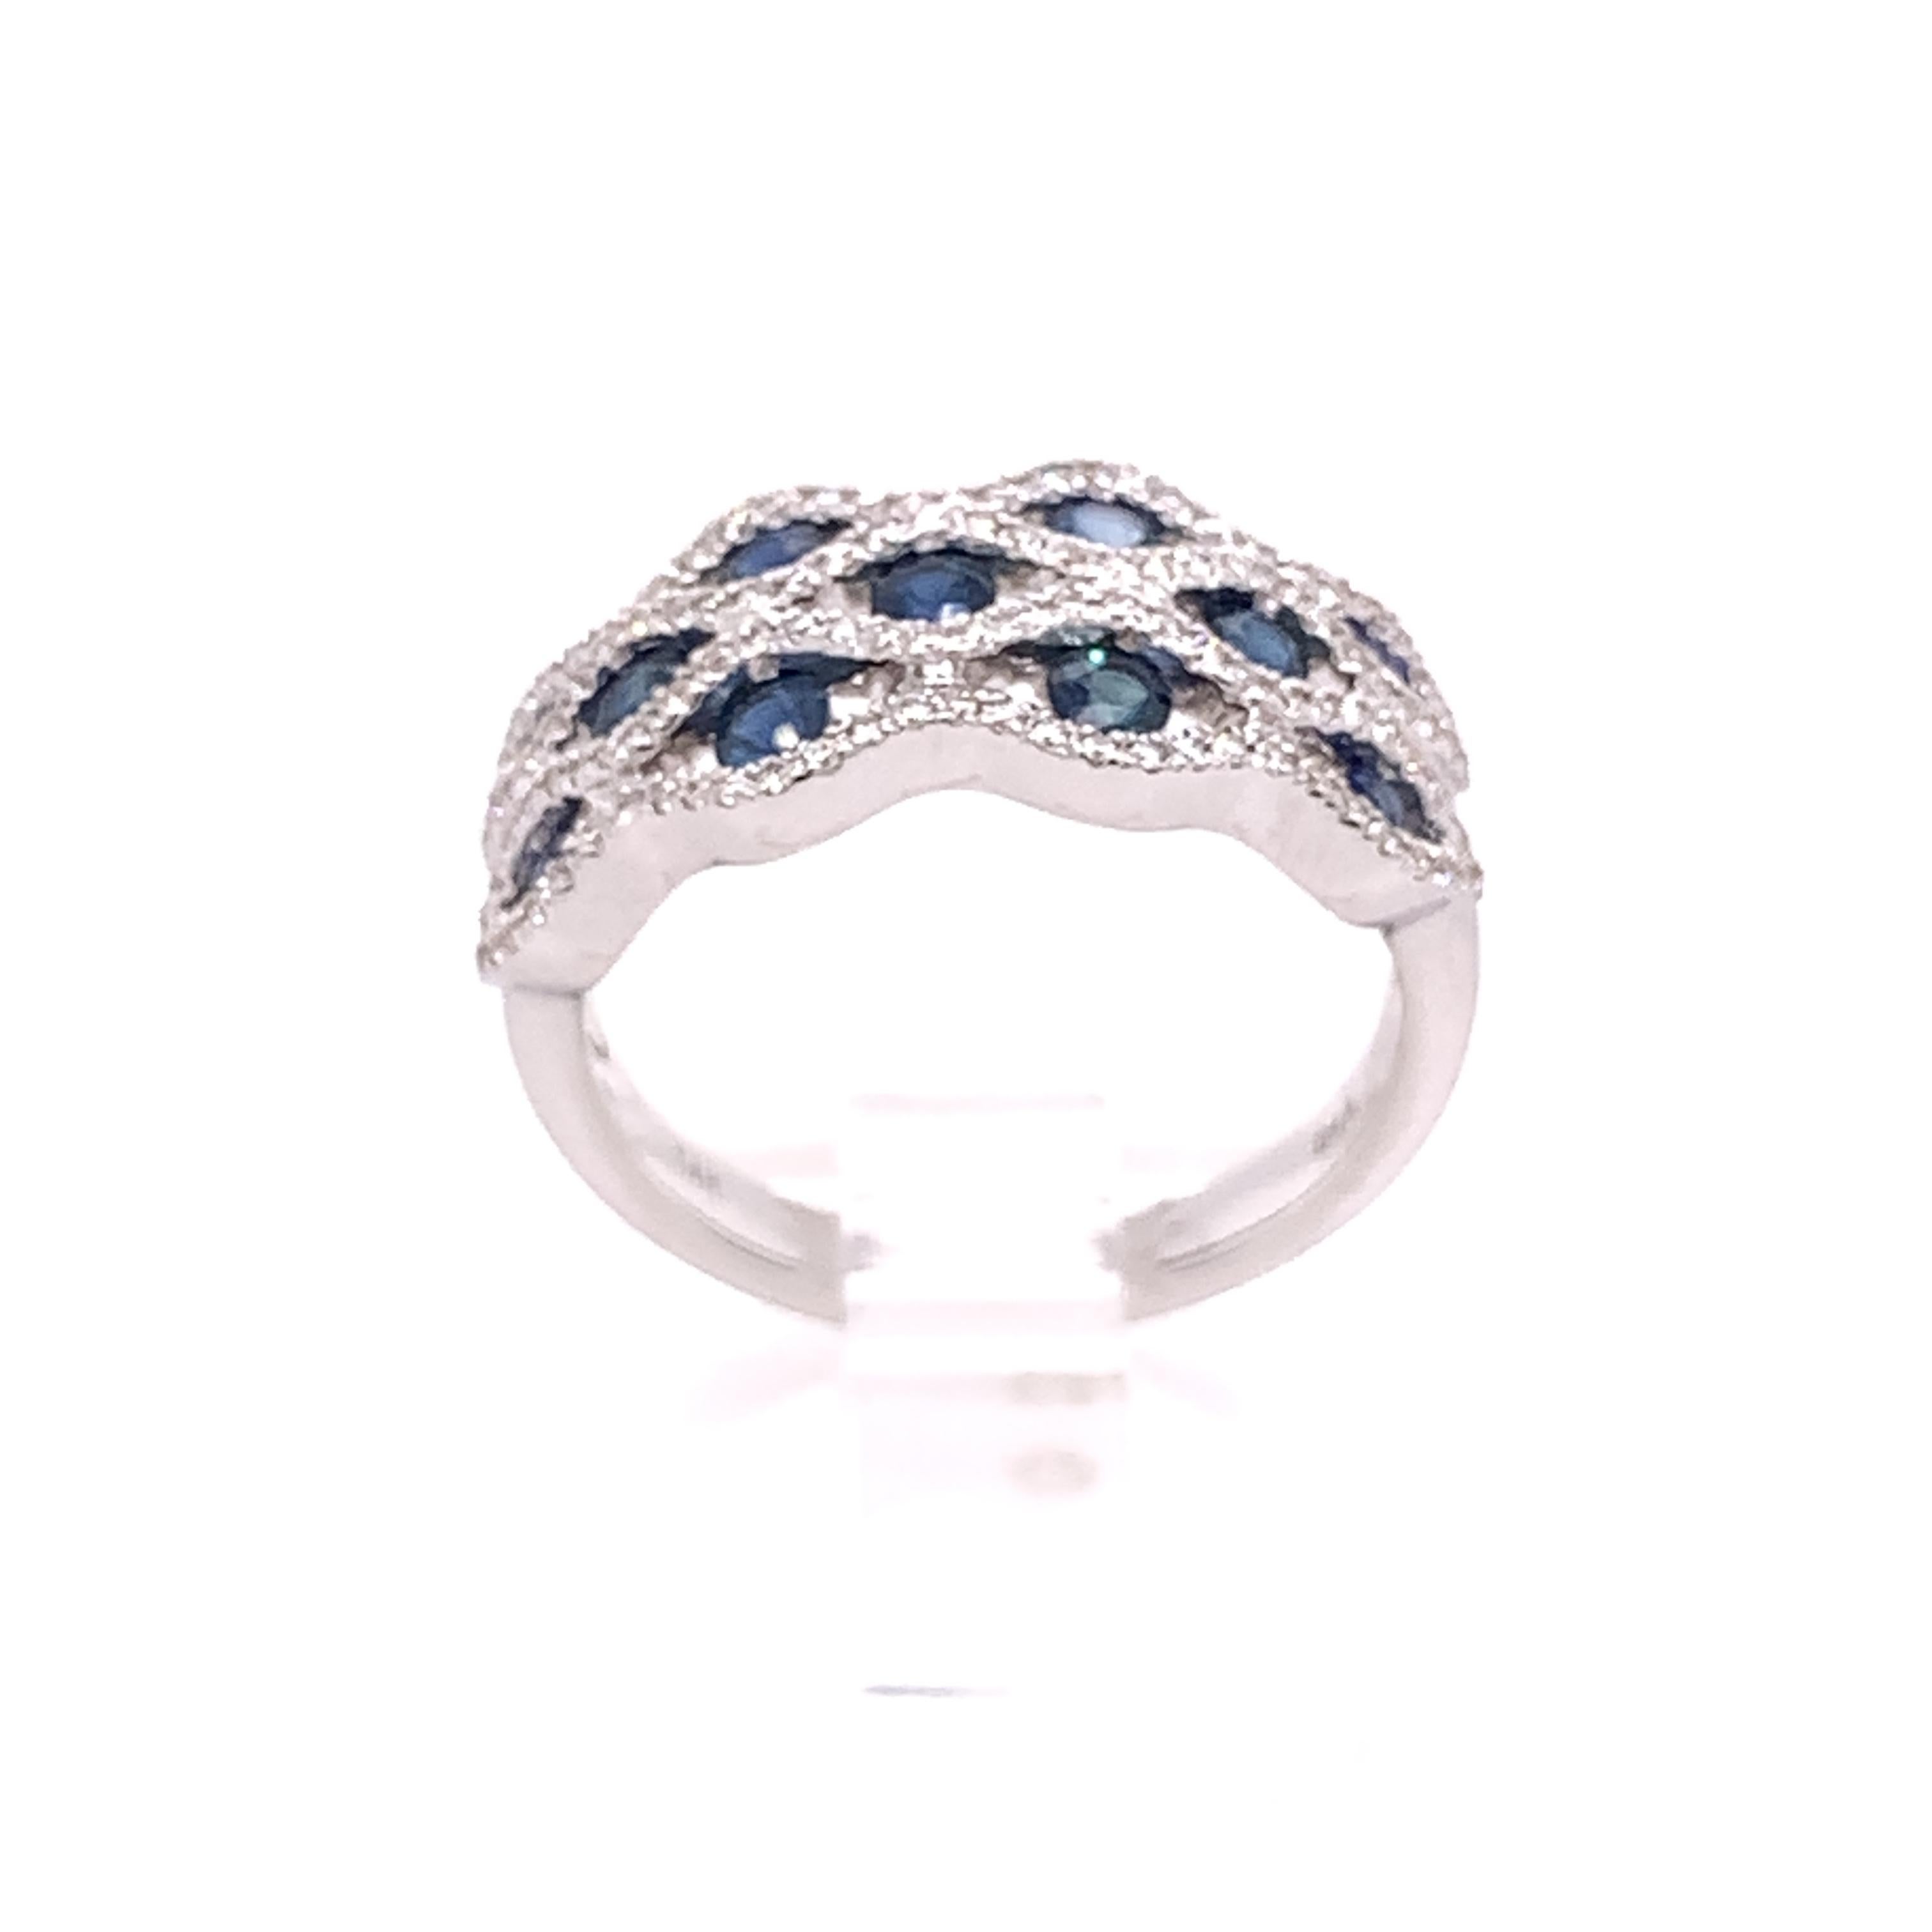 A stunning cocktail ring crafted in luxurious 14 karat white gold with 11 round natural blue sapphire stones, totaling approximately 0.66 carats. 

This ring also contains 118 natural round brilliant diamonds totaling 0.35 carats, G-H color, and